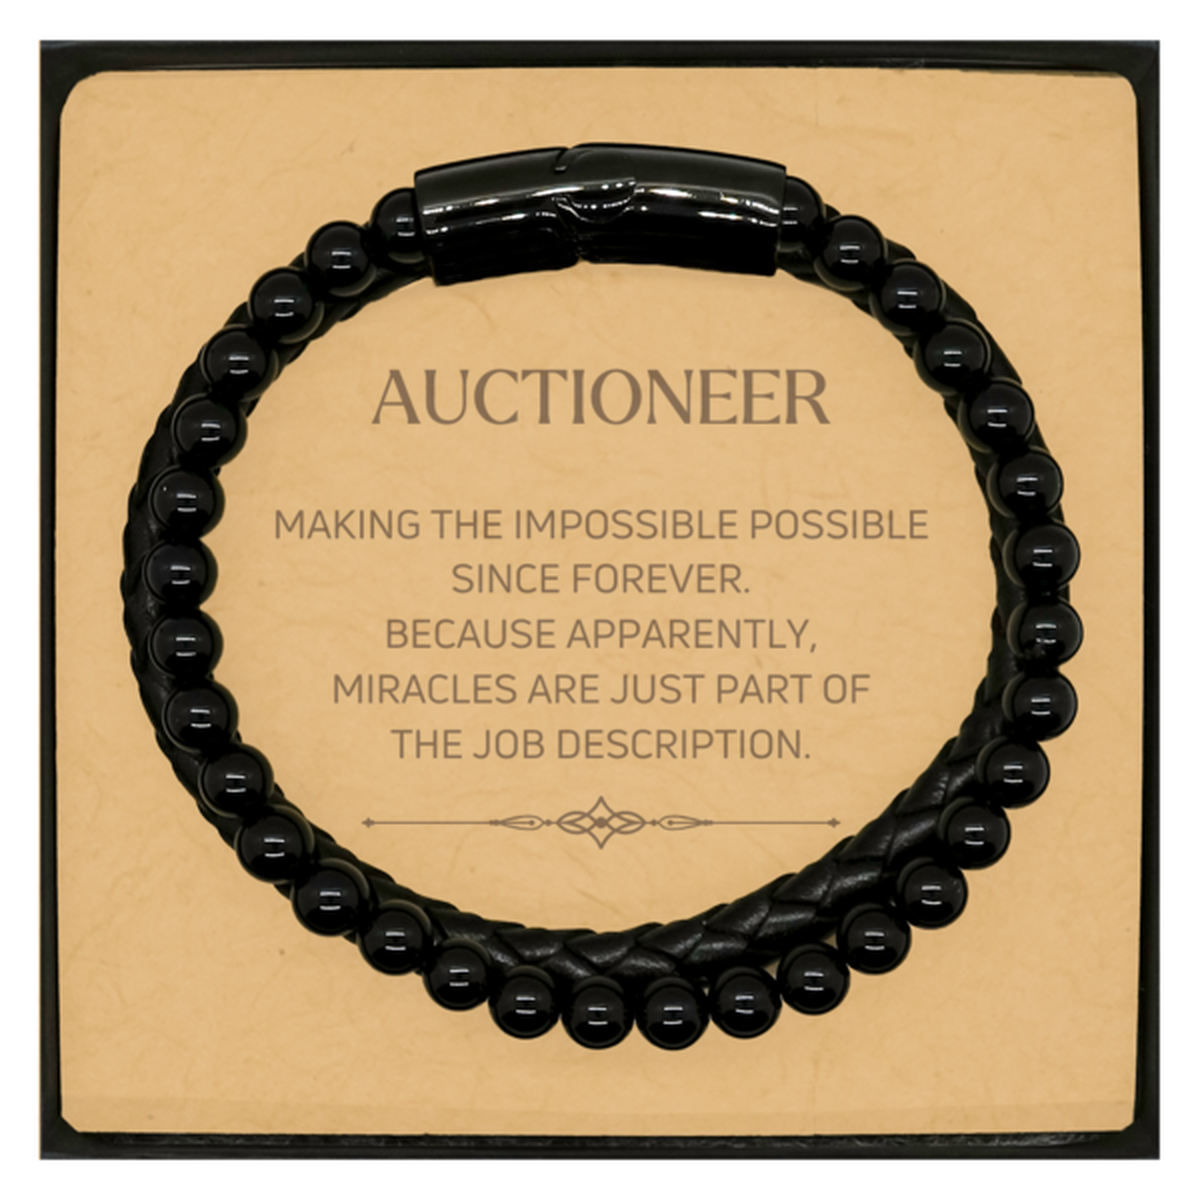 Funny Auctioneer Gifts, Miracles are just part of the job description, Inspirational Birthday Christmas Stone Leather Bracelets For Auctioneer, Men, Women, Coworkers, Friends, Boss